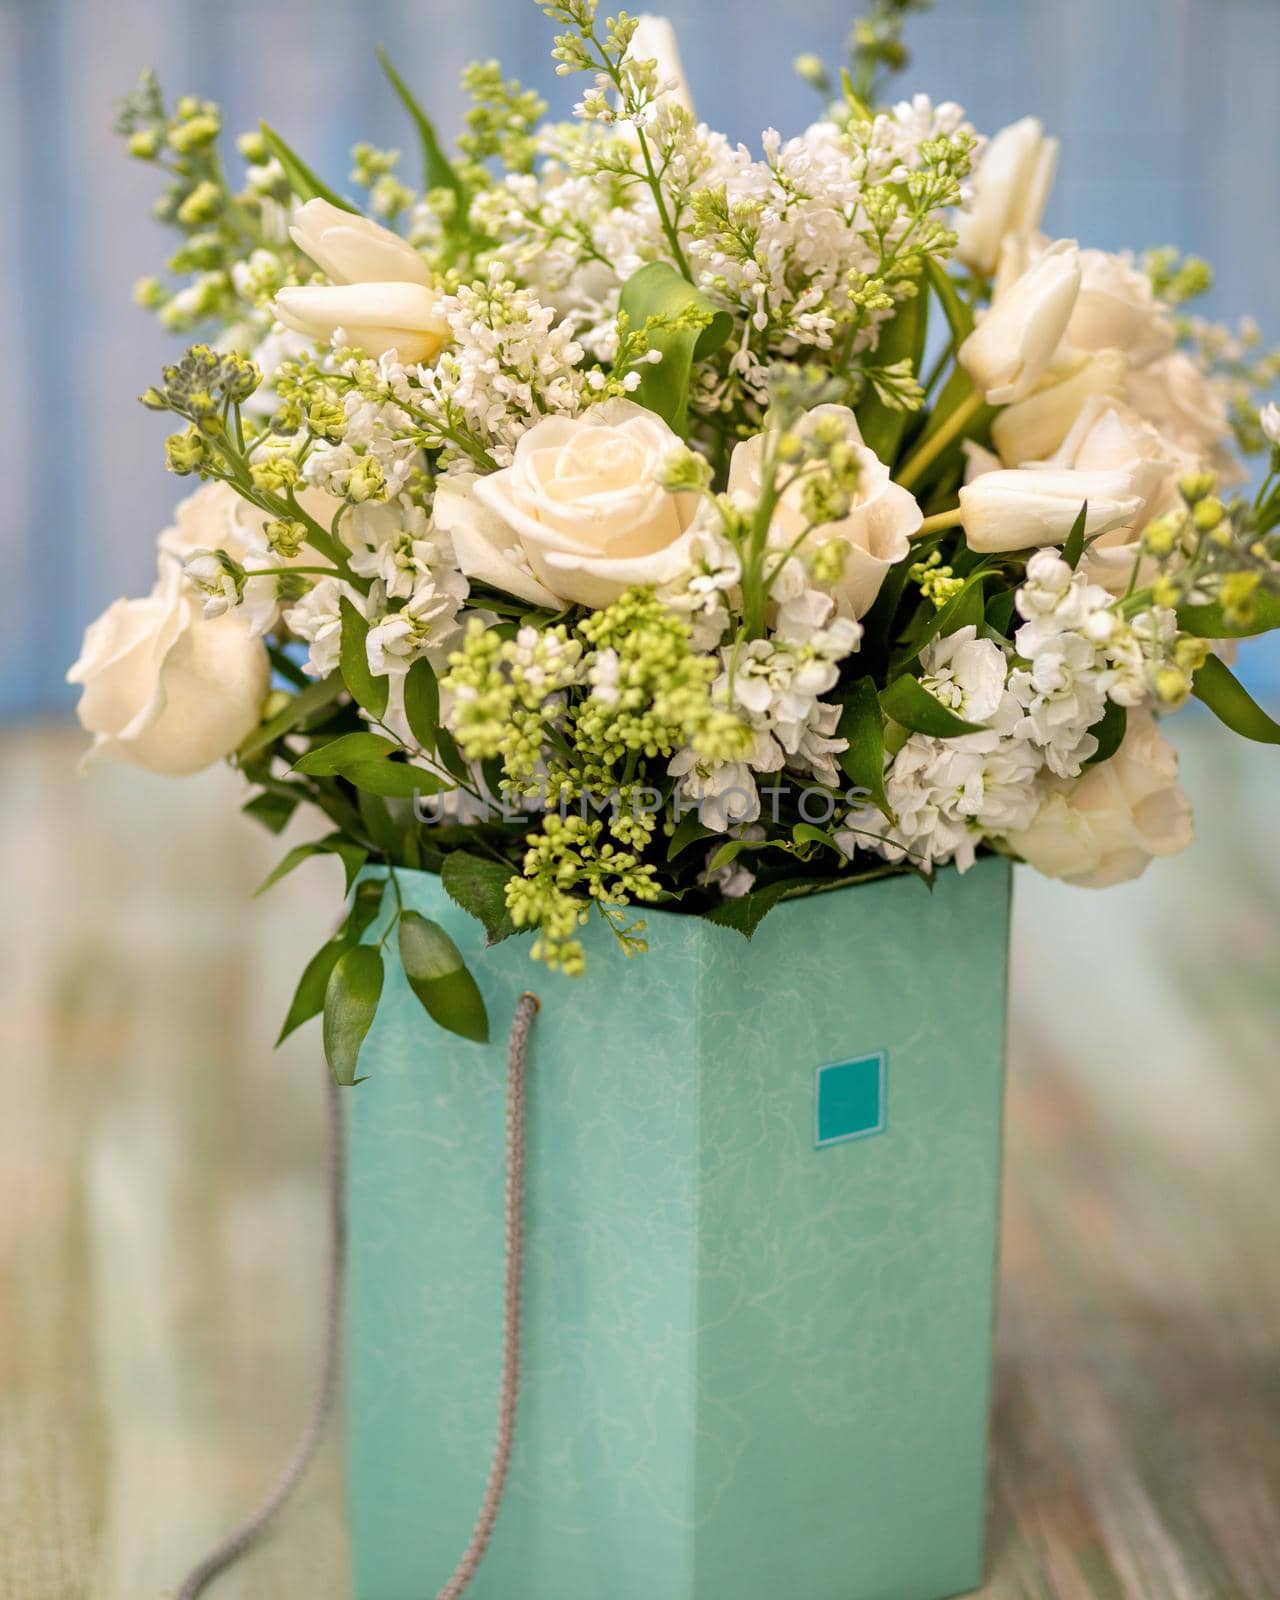 Beautiful white flower bouquet in the box close up by ferhad